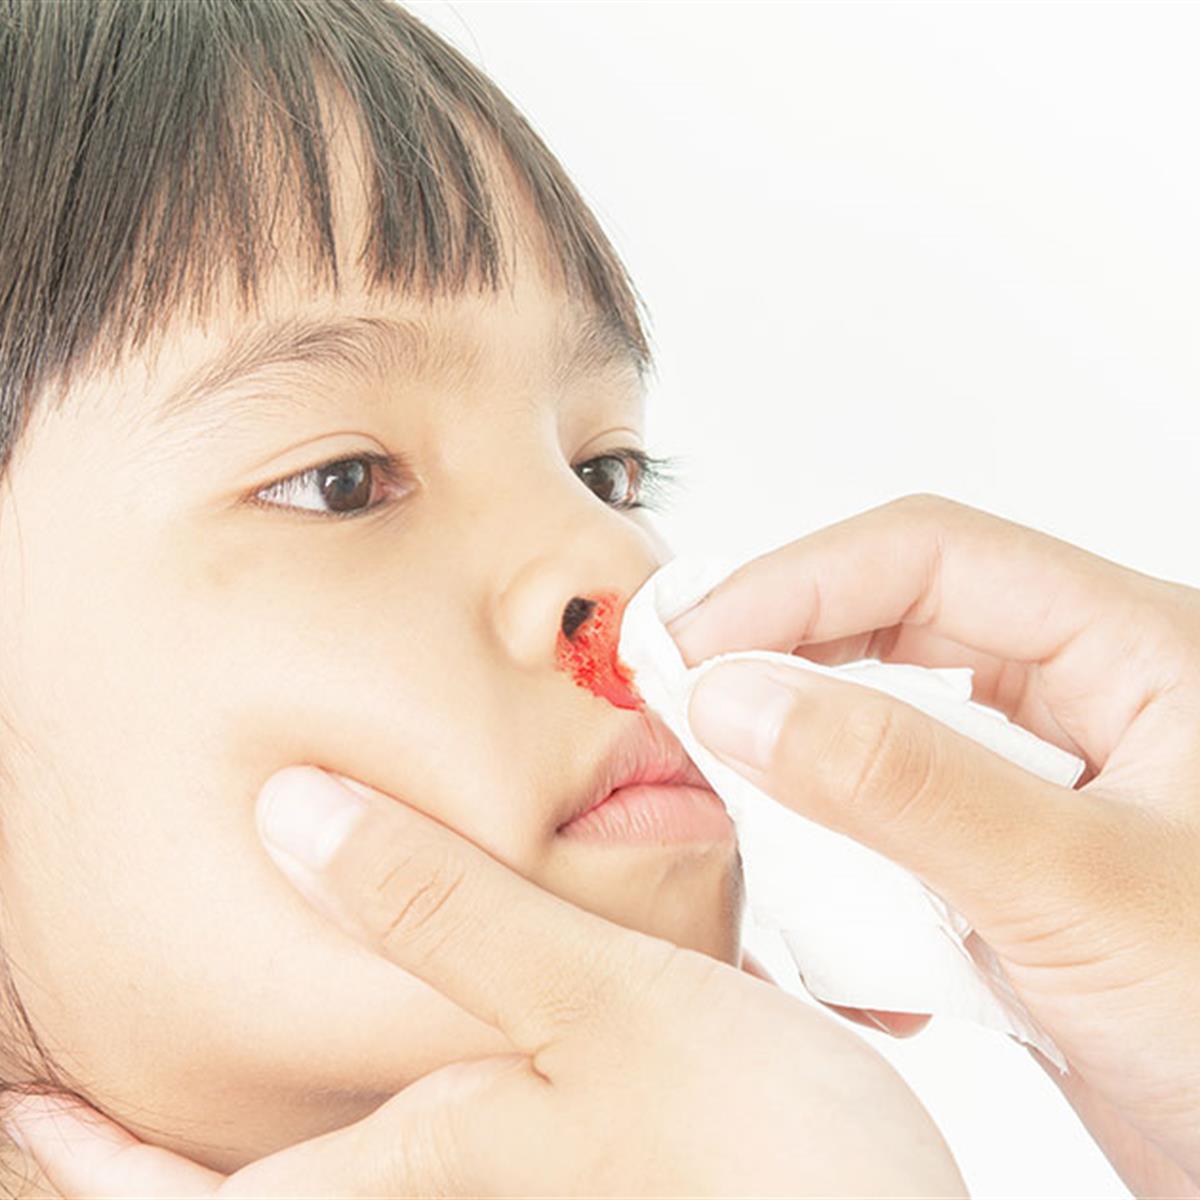 How to stop a nosebleed: Tips and treatment